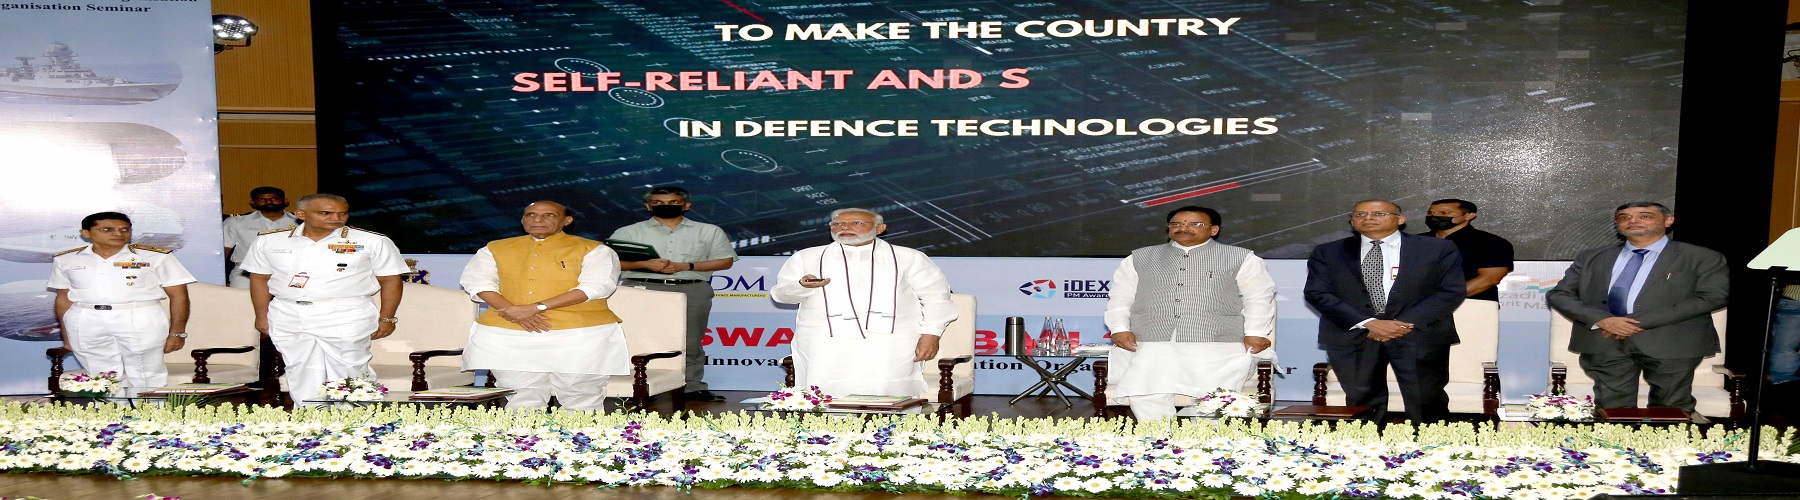 Prime Minister Shri Narendra Modi unveiling SPRINT Challenges, aimed at giving a boost to the usage of indigenous technology in Indian Navy, during Naval Innovation and Indigenisation Organisation (NIIO) seminar Swavlamban in New Delhi on July 18, 2022. A